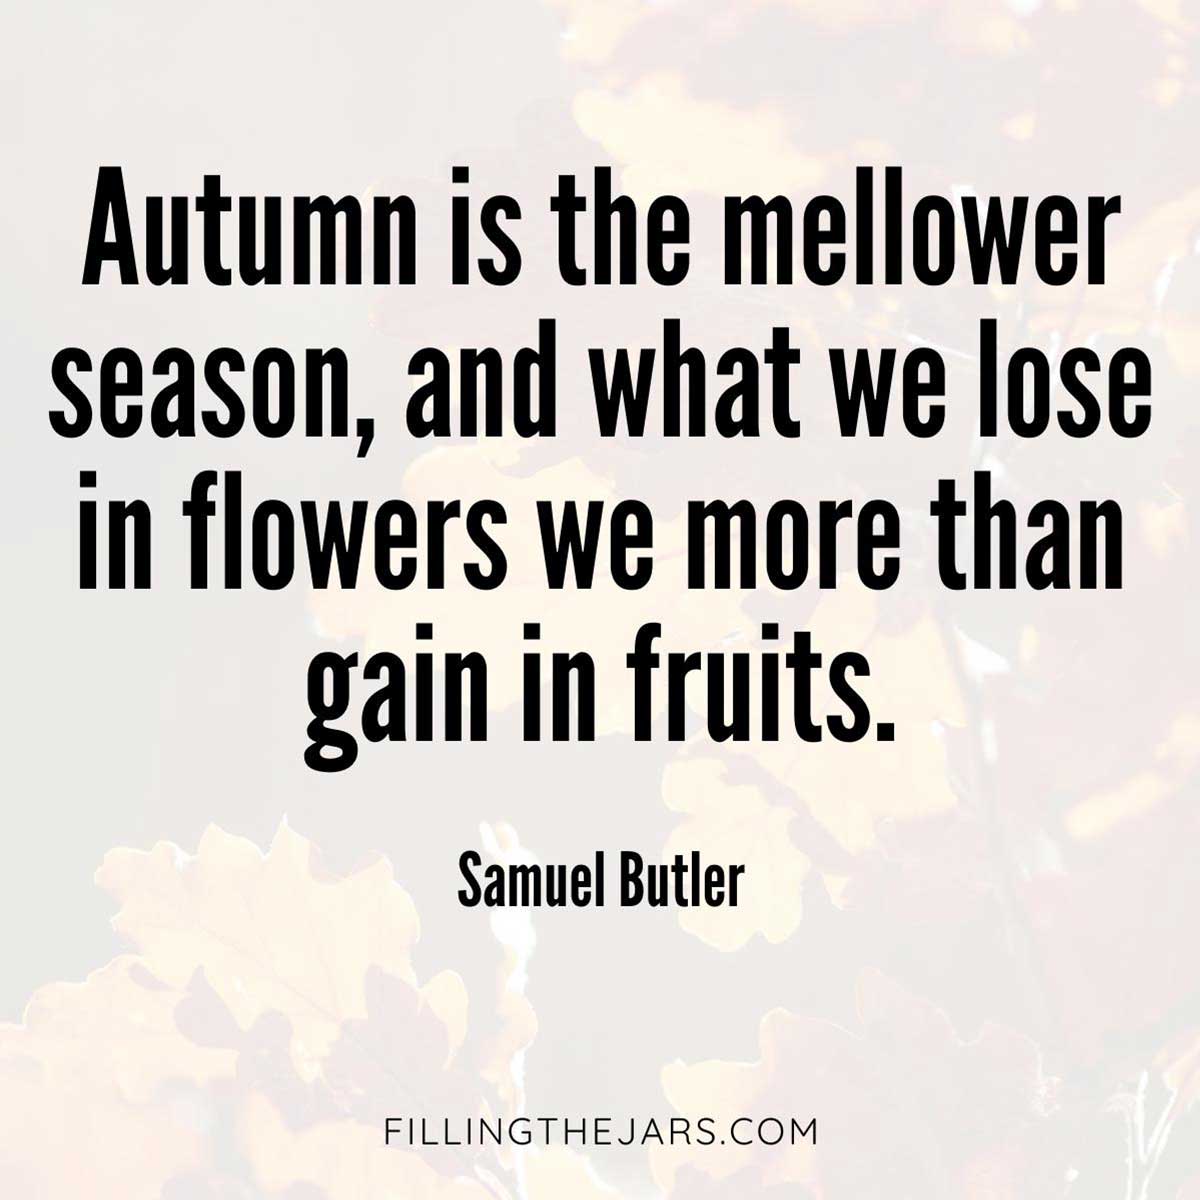 Samuel Butler mellower season quote in black text on faded background of autumn leaves.